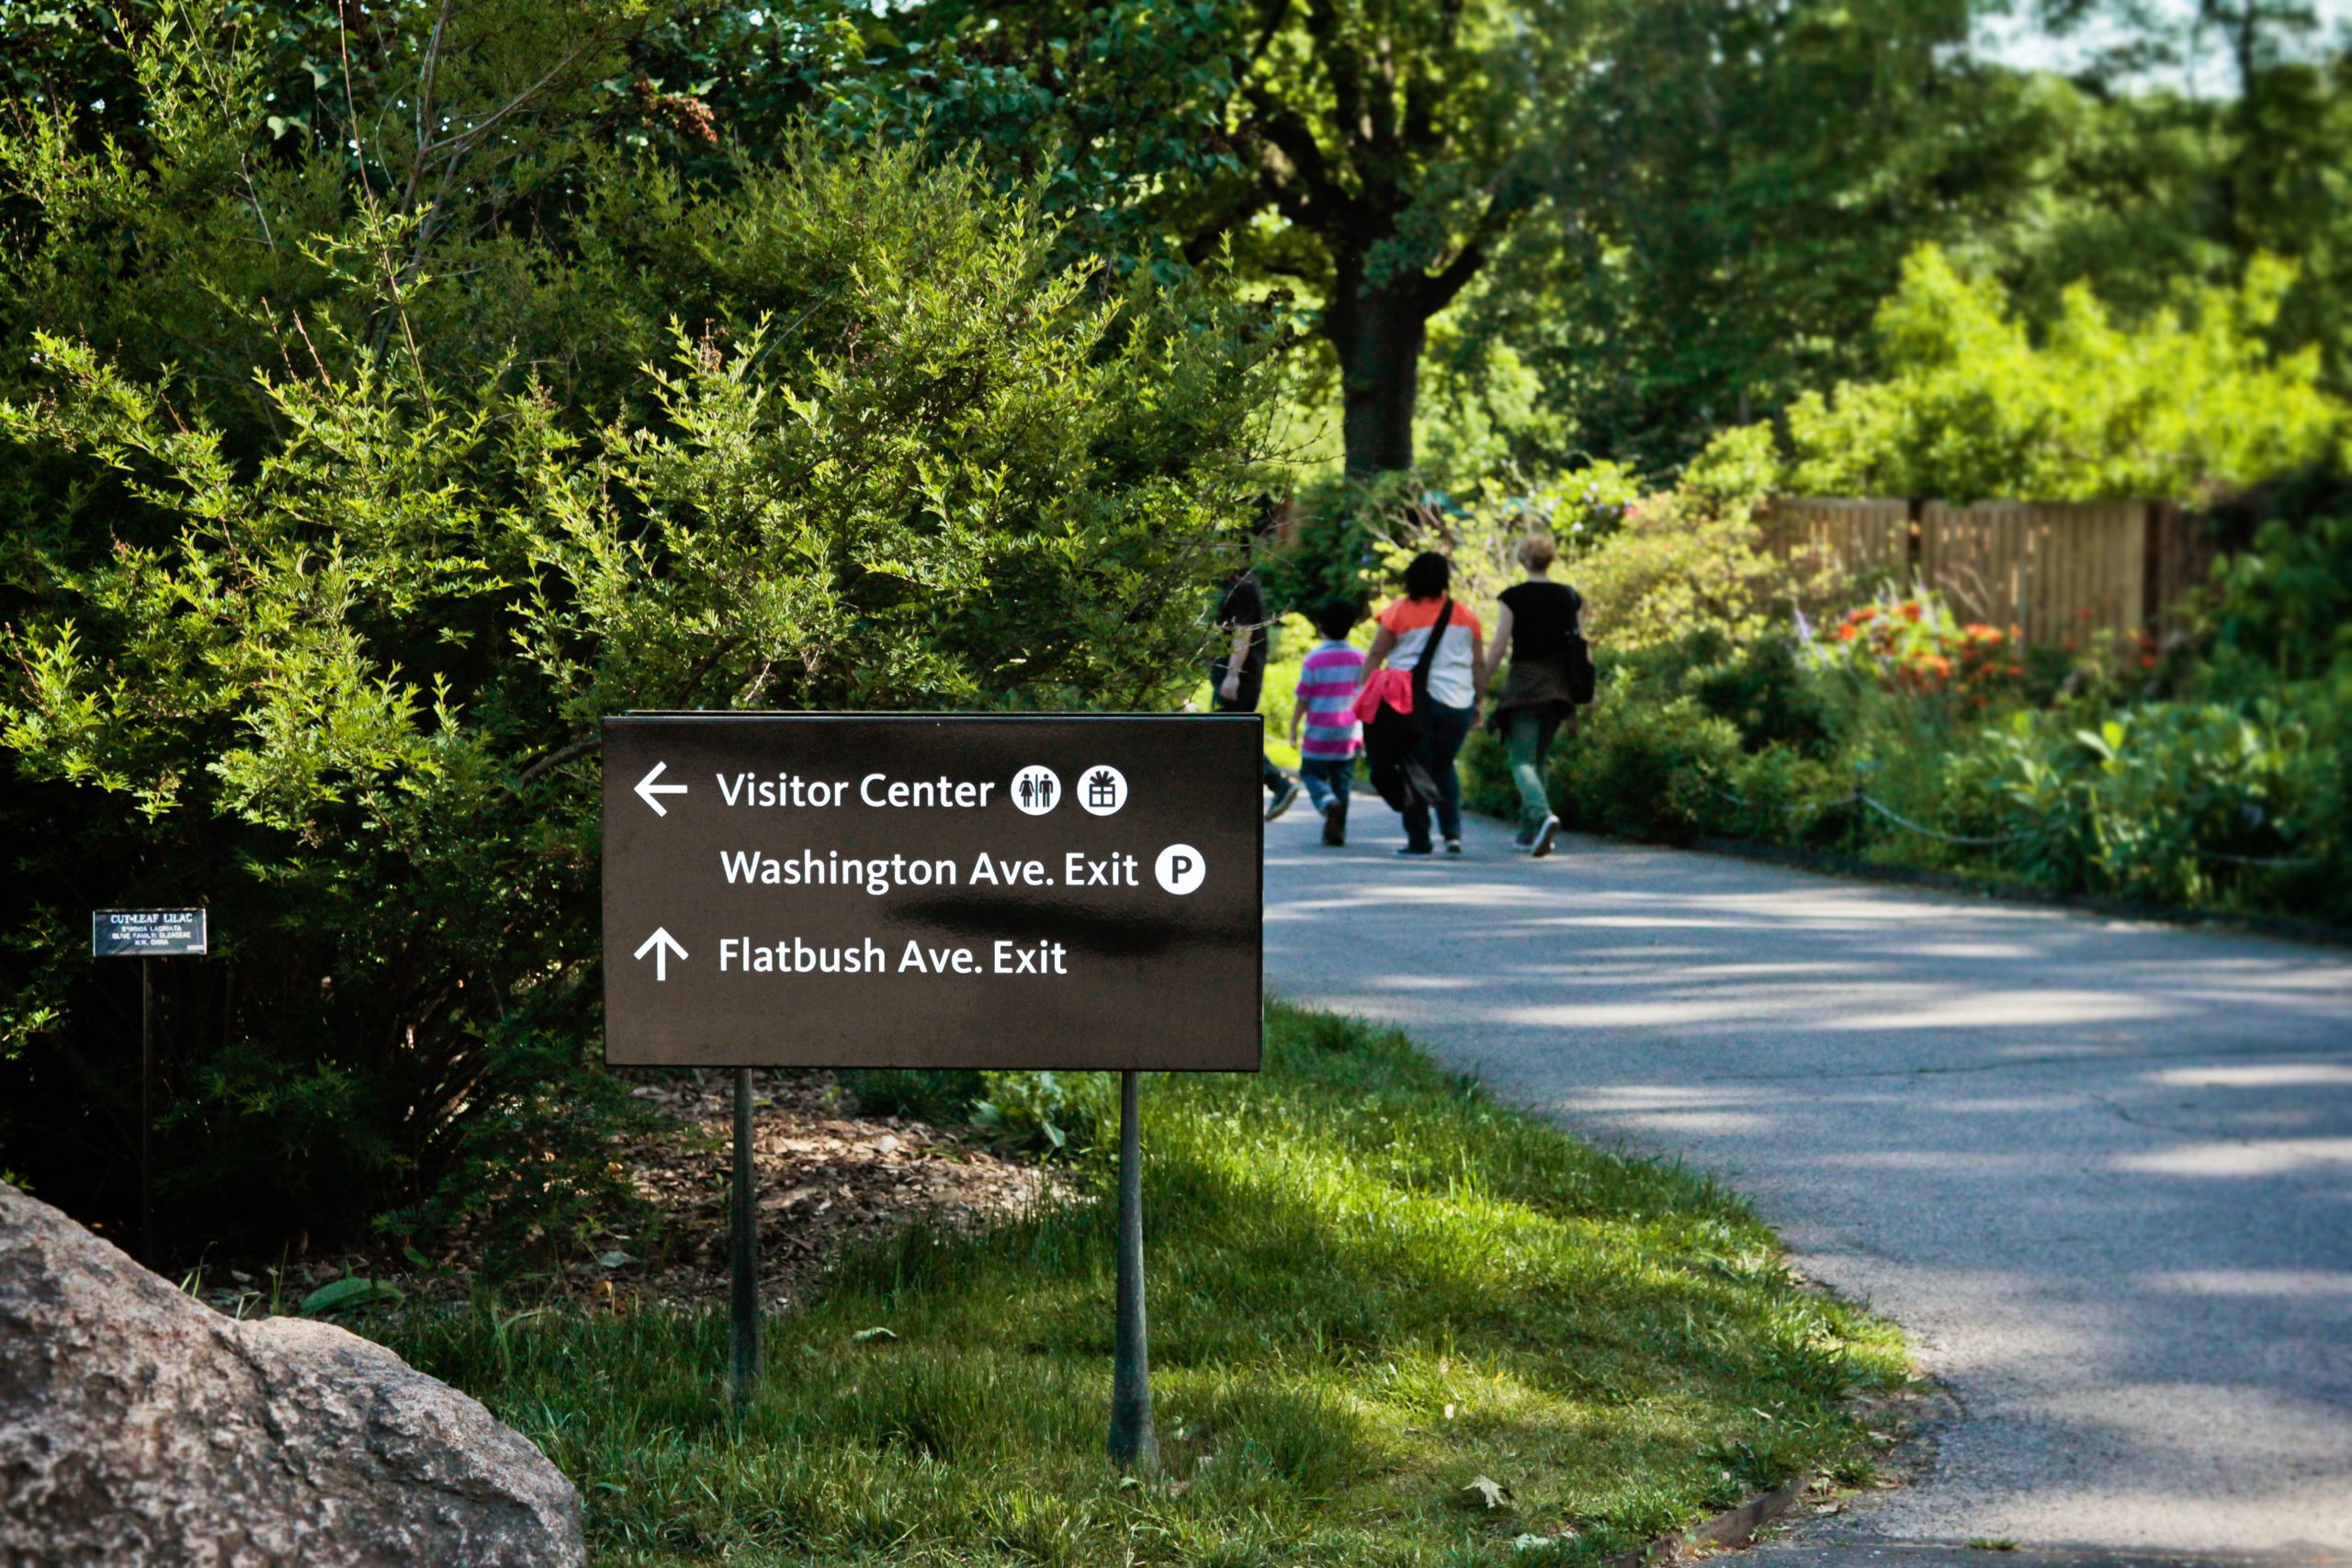 Project Image 6 for SIgns & Wayfinding, Brooklyn Botanic Garden